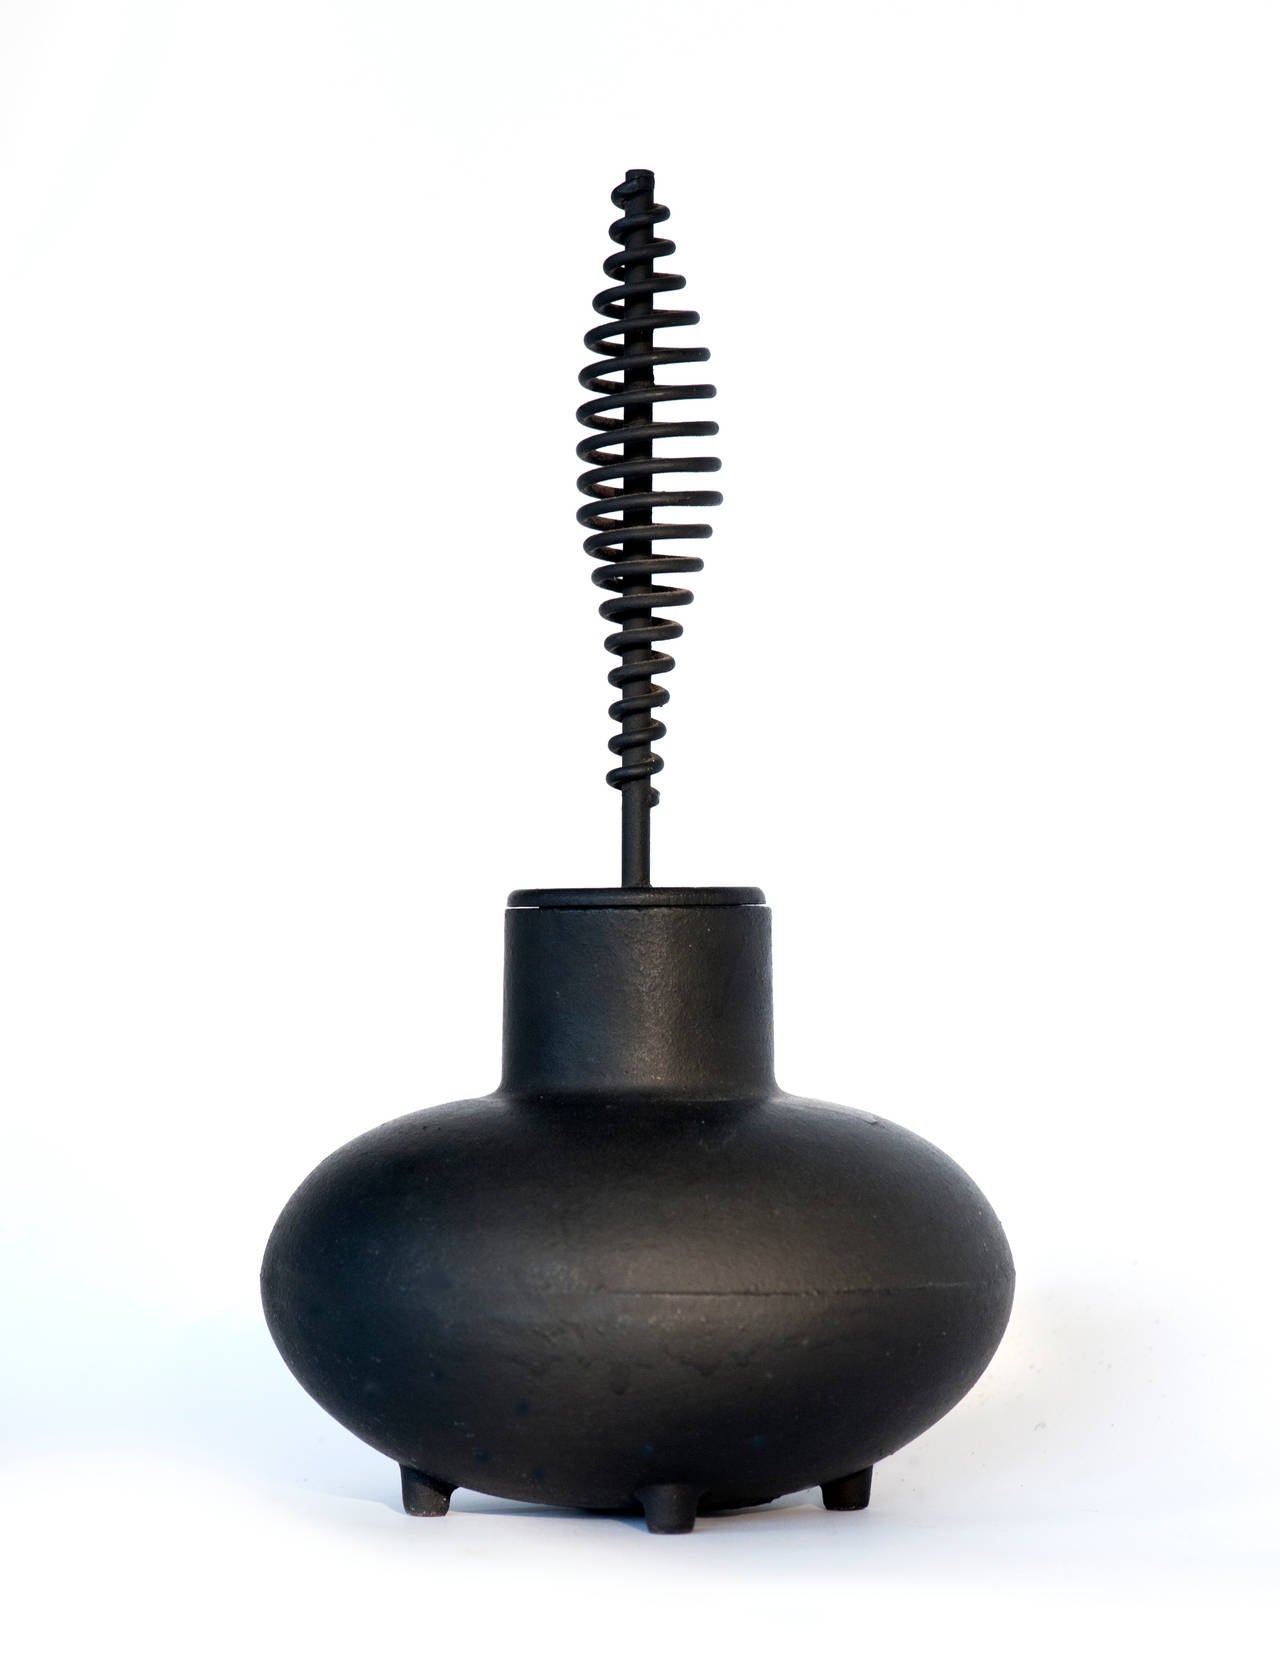 Excellent example of George Nelson designed firestarter.  Made of cast iron by Howard Miller of Zeeland, Michigan. 